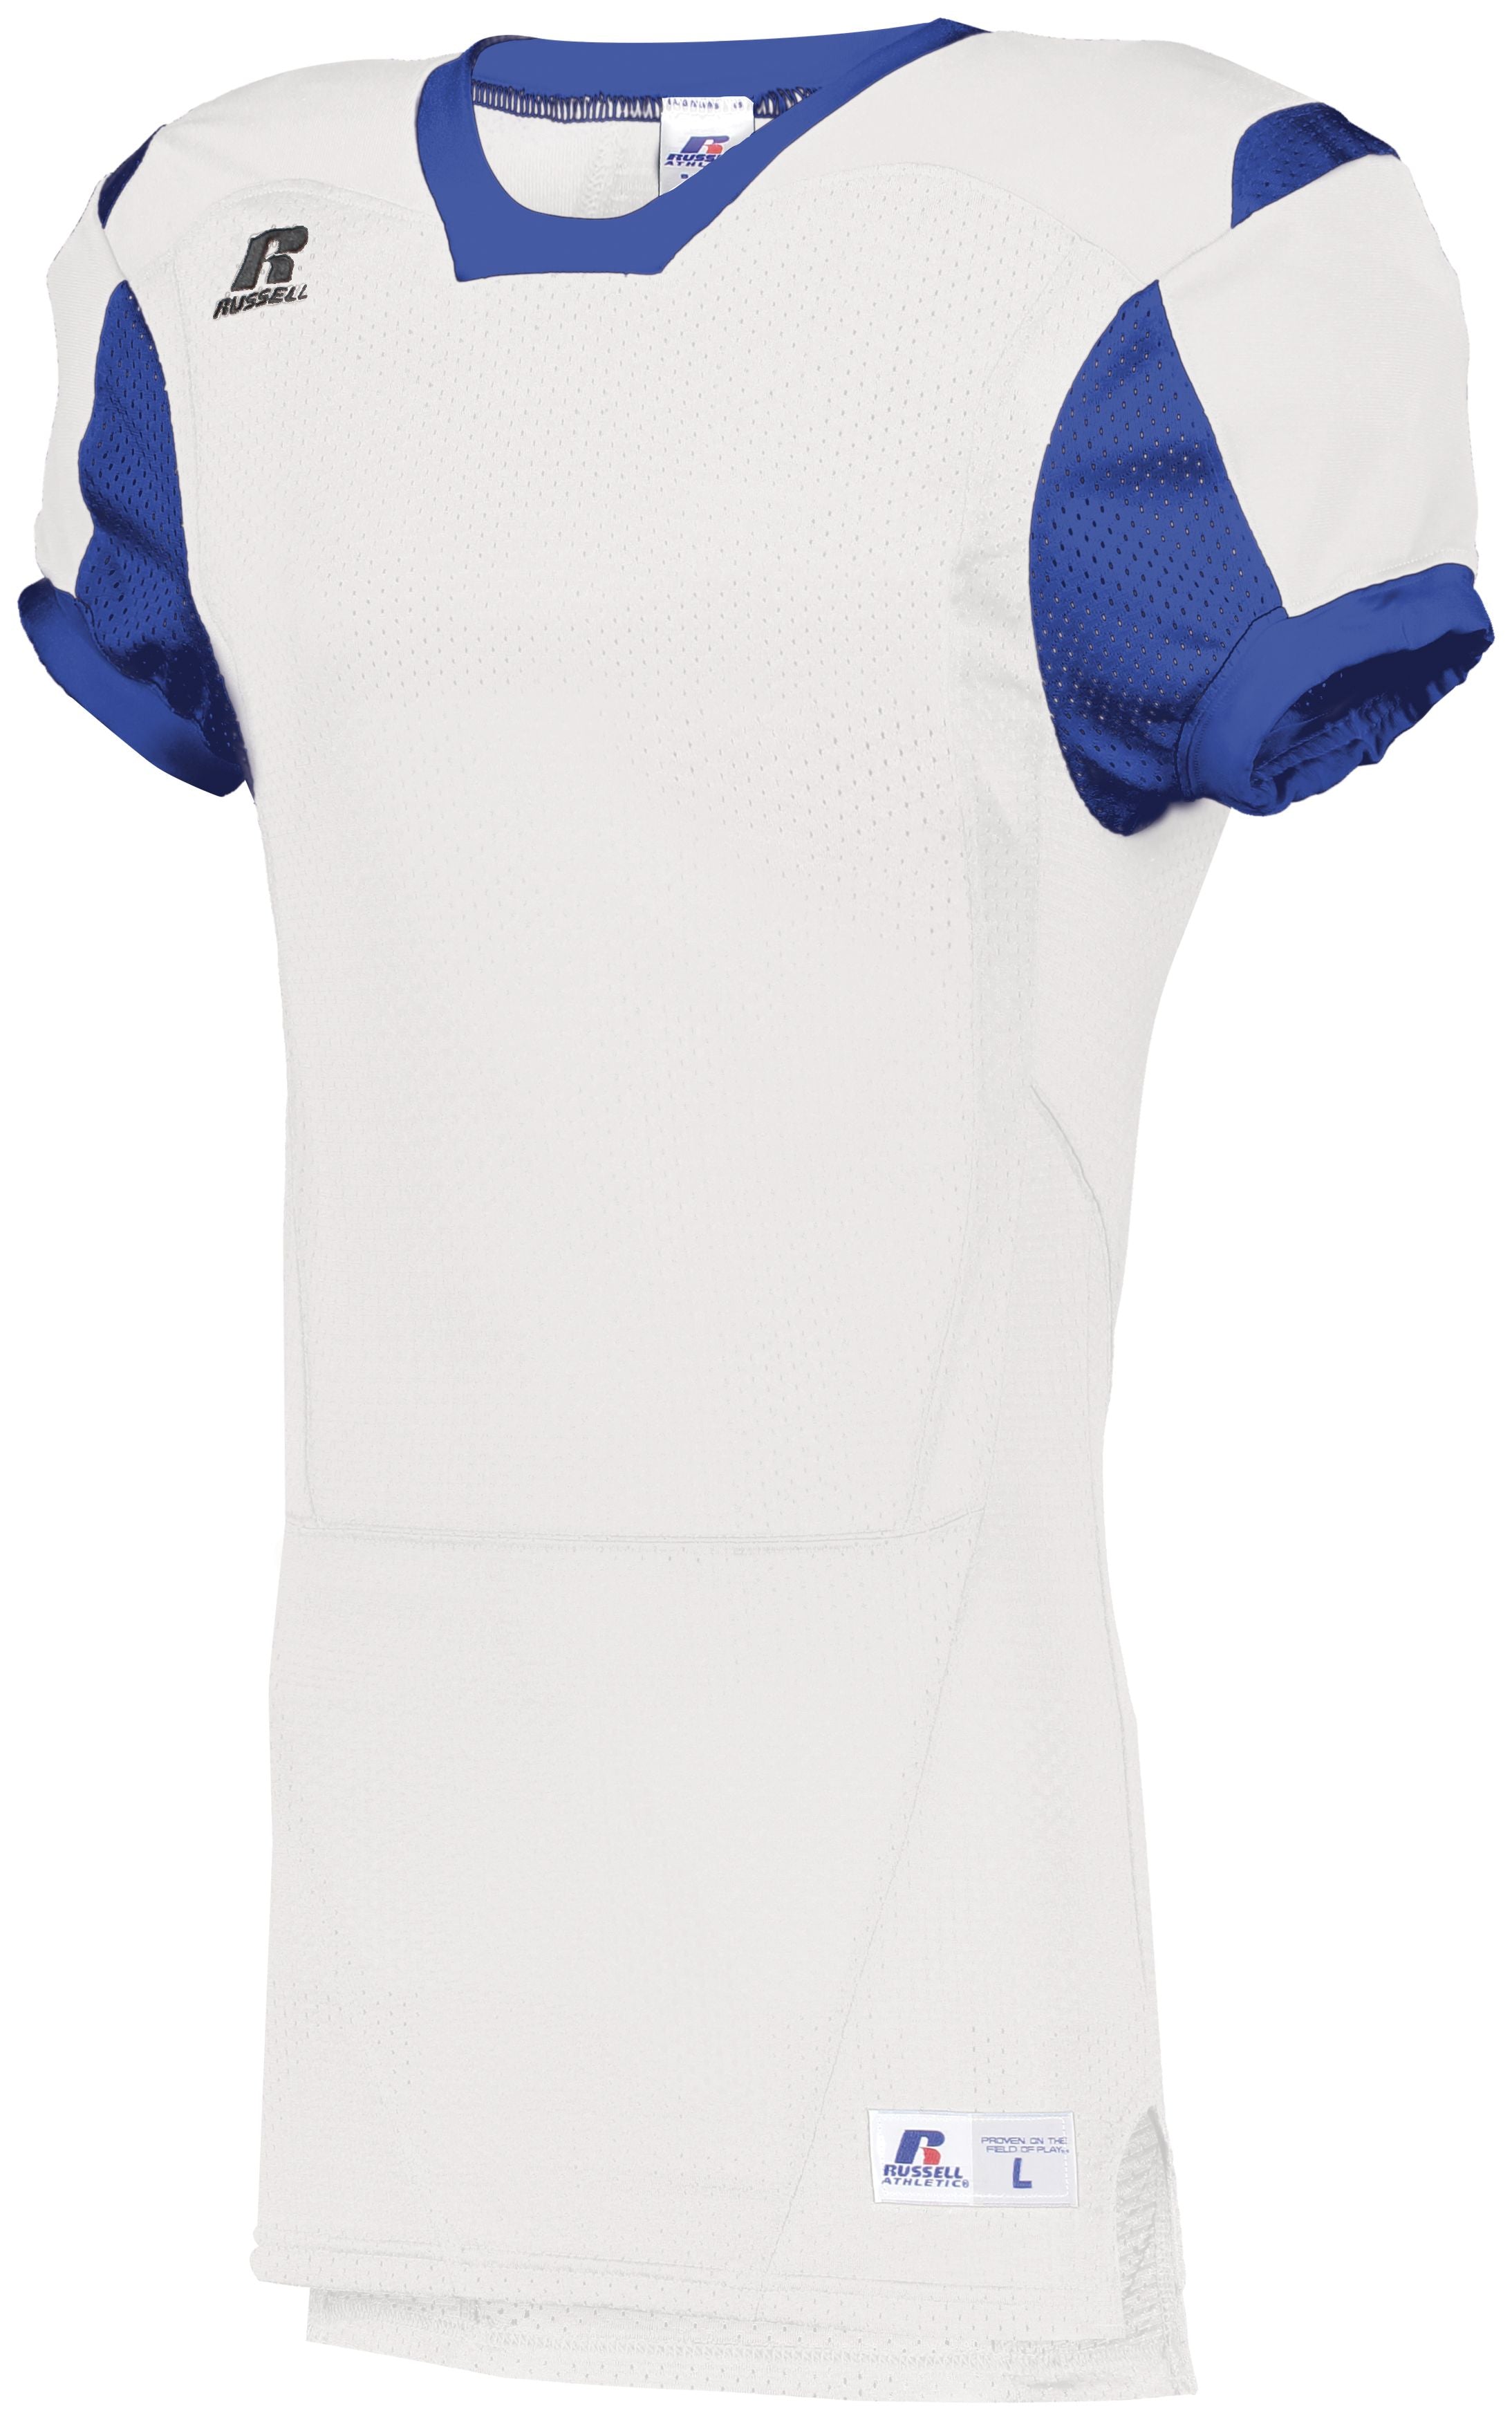 Russell Athletic Youth Color Block Game Jersey in White/Royal  -Part of the Youth, Youth-Jersey, Football, Russell-Athletic-Products, Shirts, All-Sports, All-Sports-1 product lines at KanaleyCreations.com